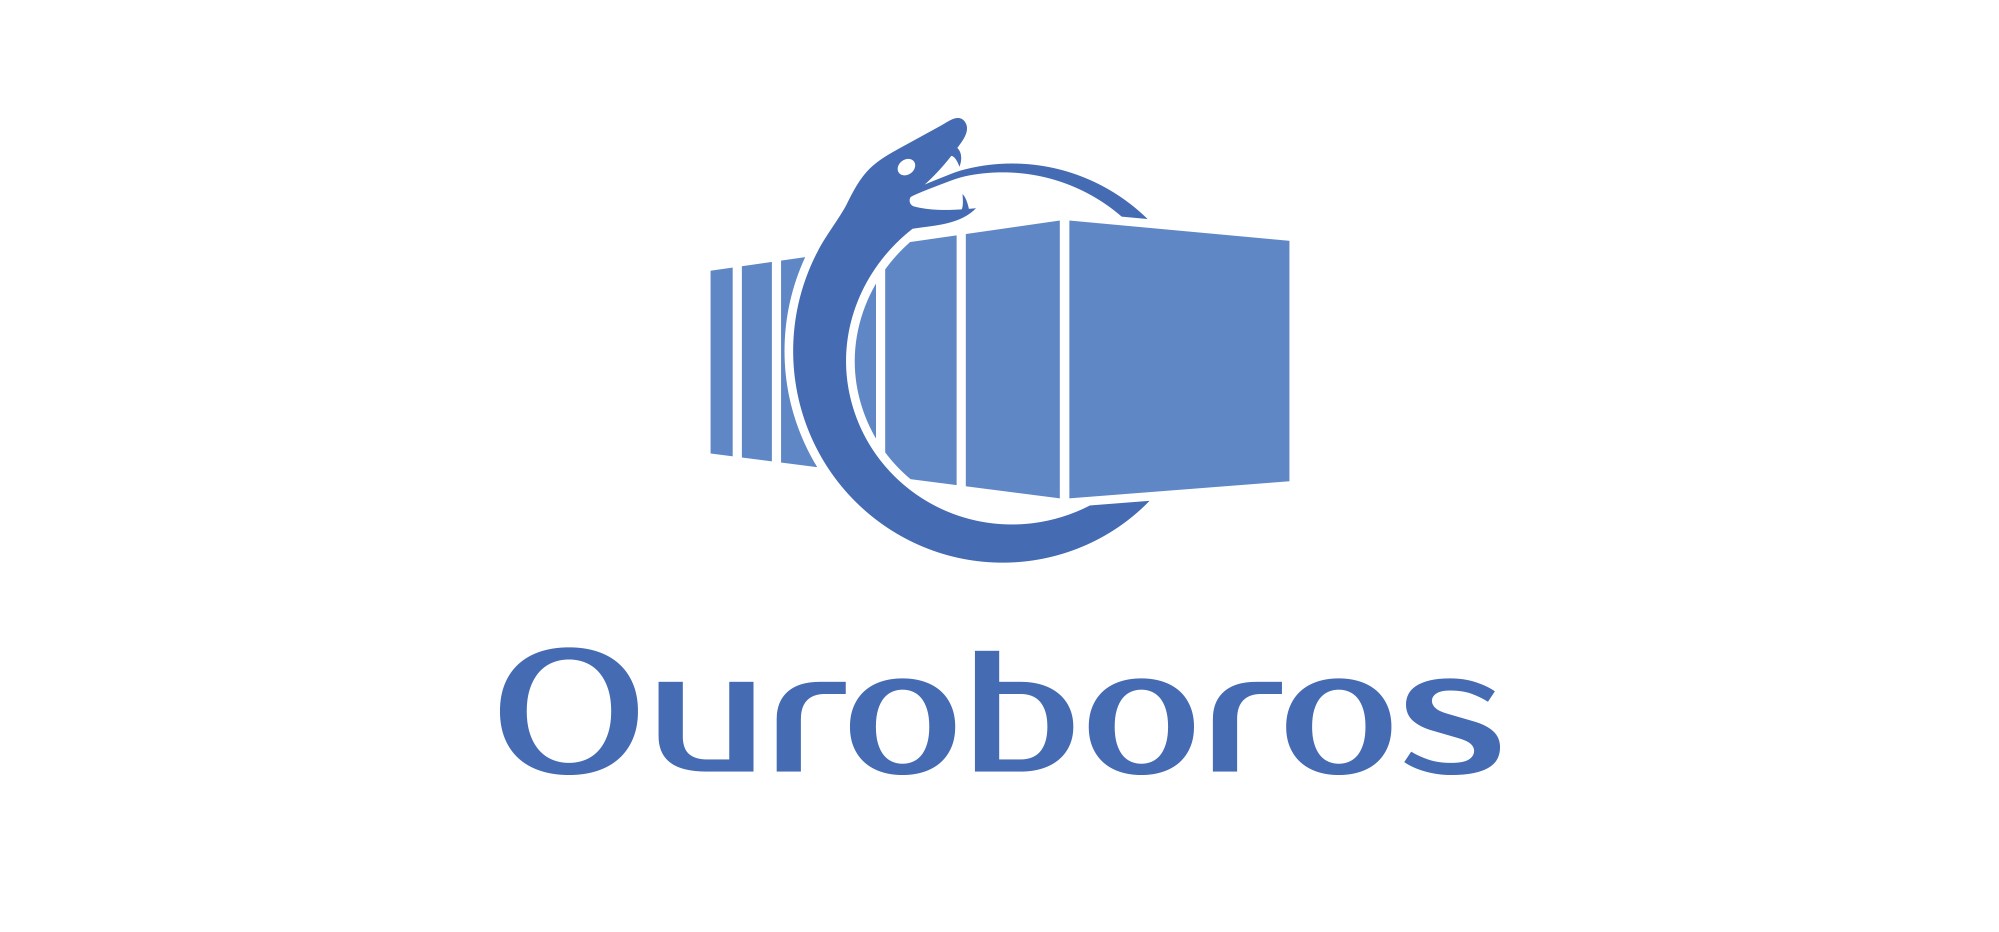 Updating Docker Containers With Ouroboros